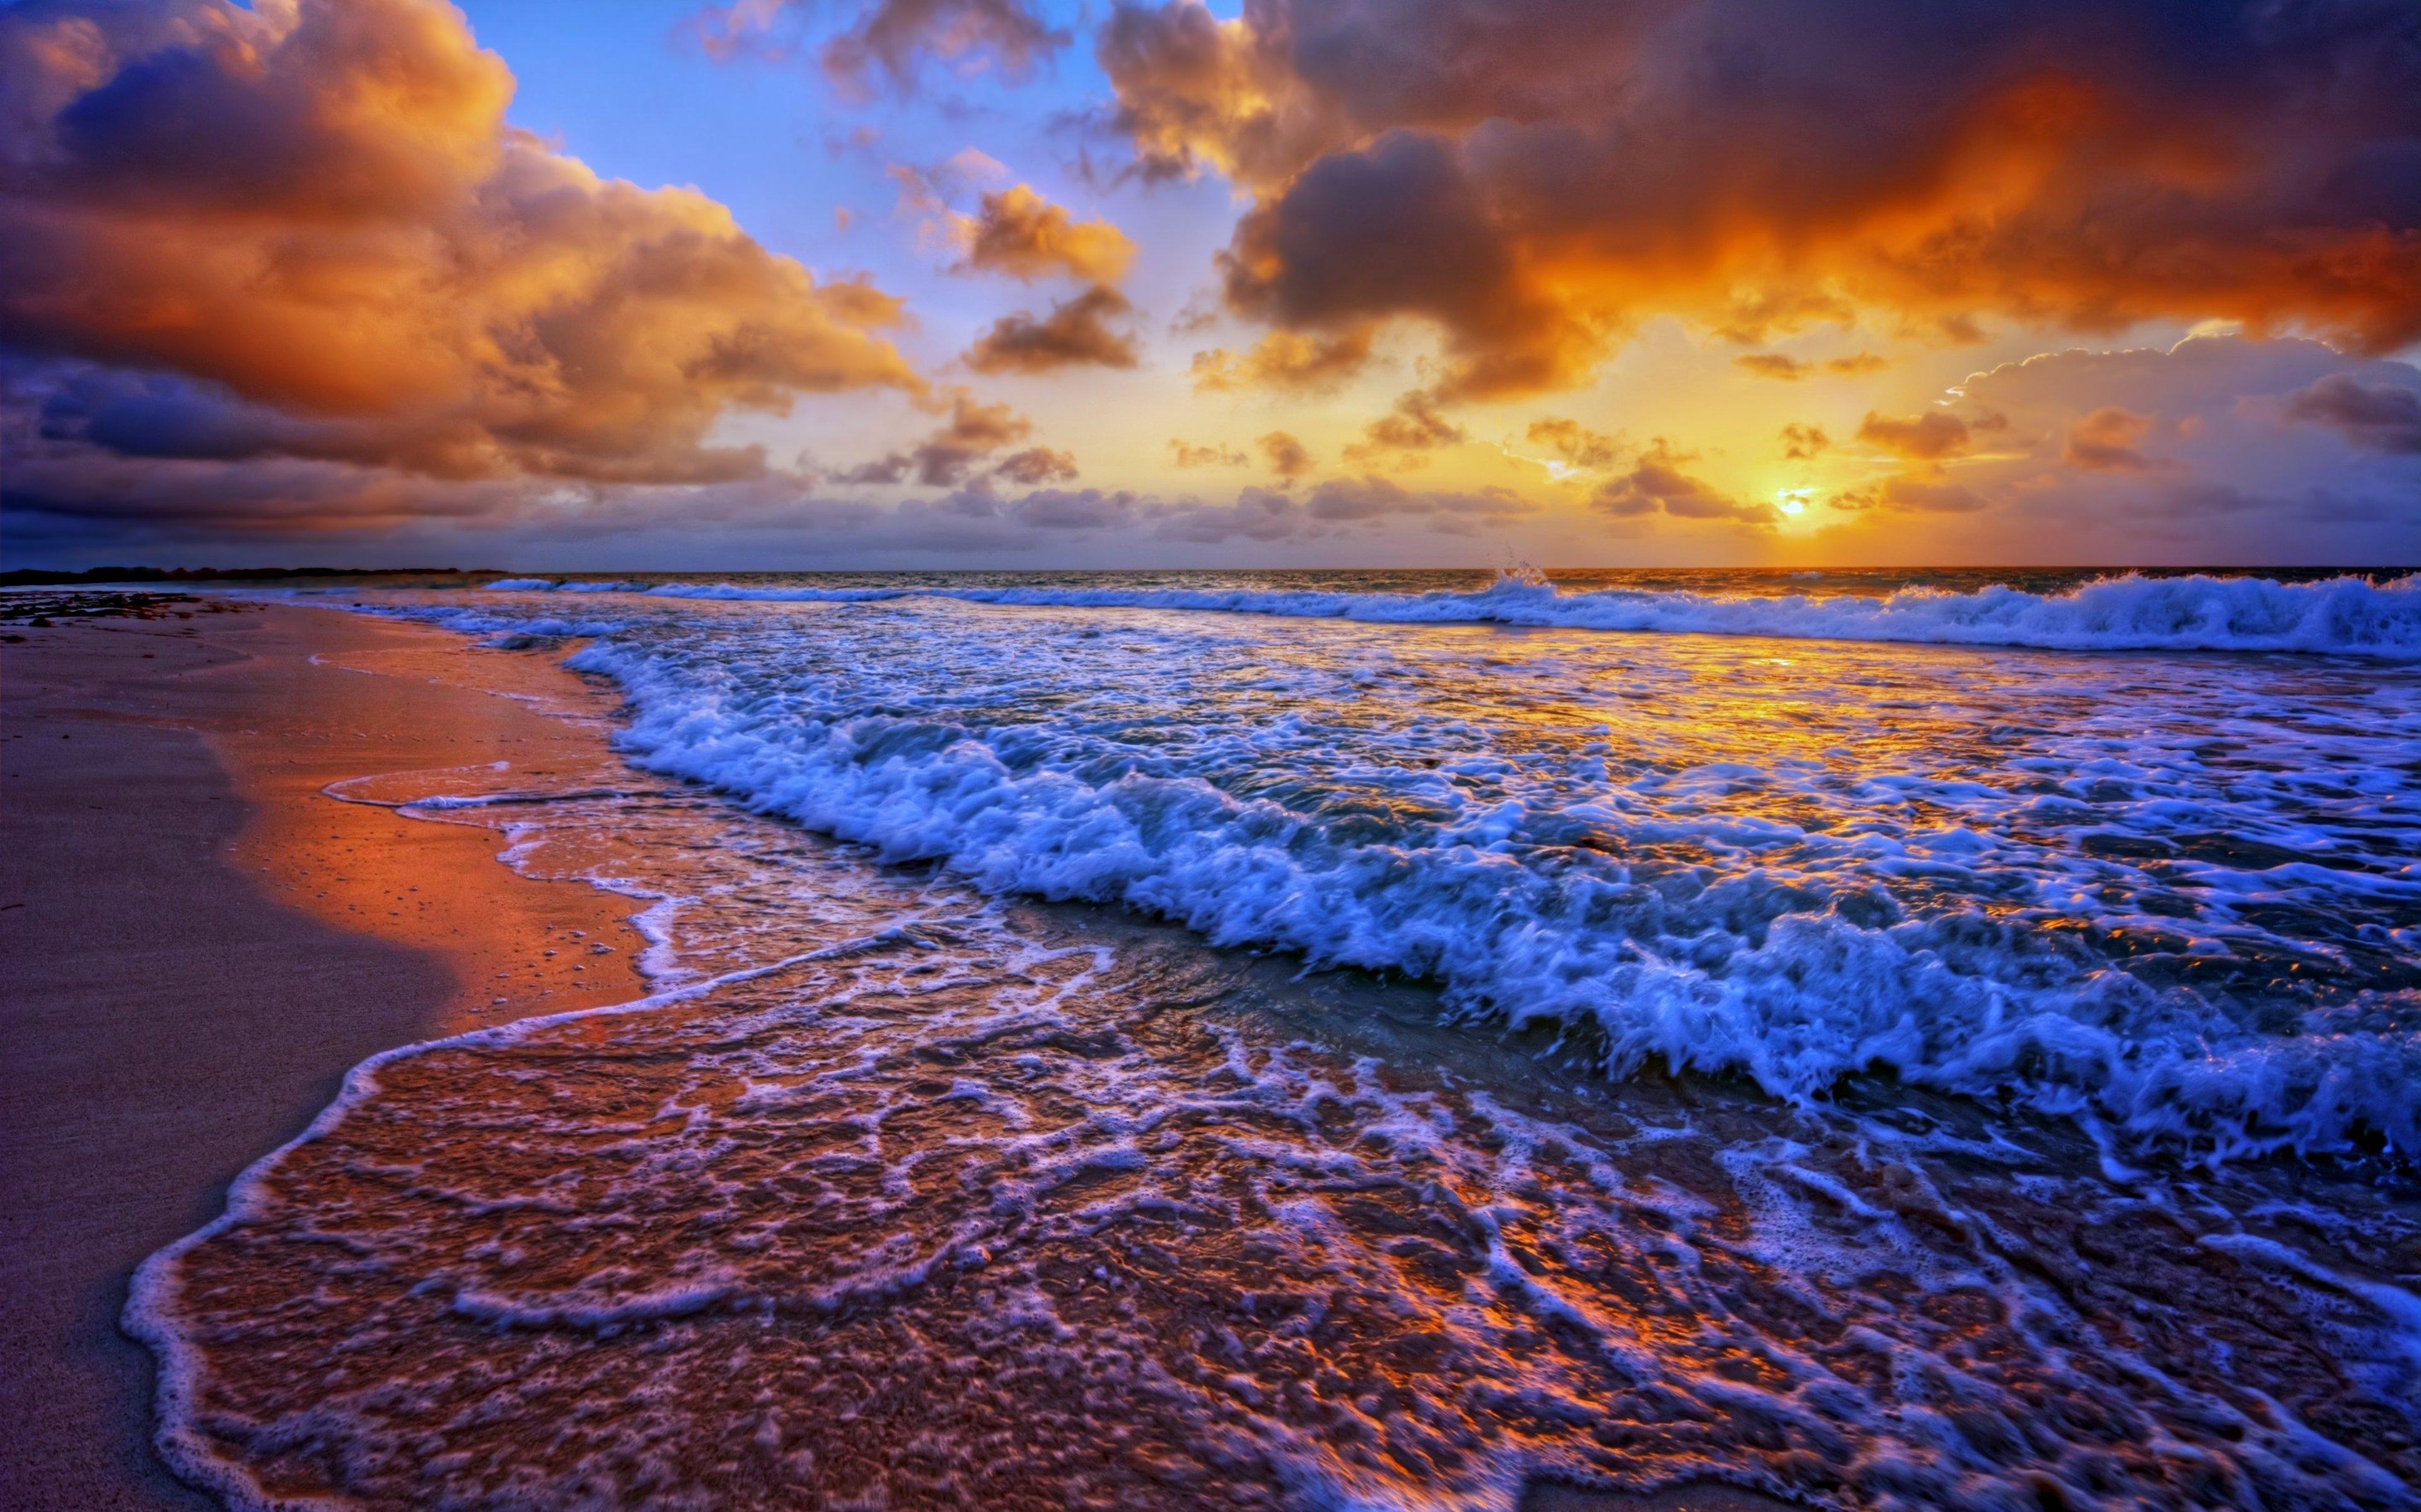 beaches Sea Ocean Waves Sunset Sky Clouds Landscapes